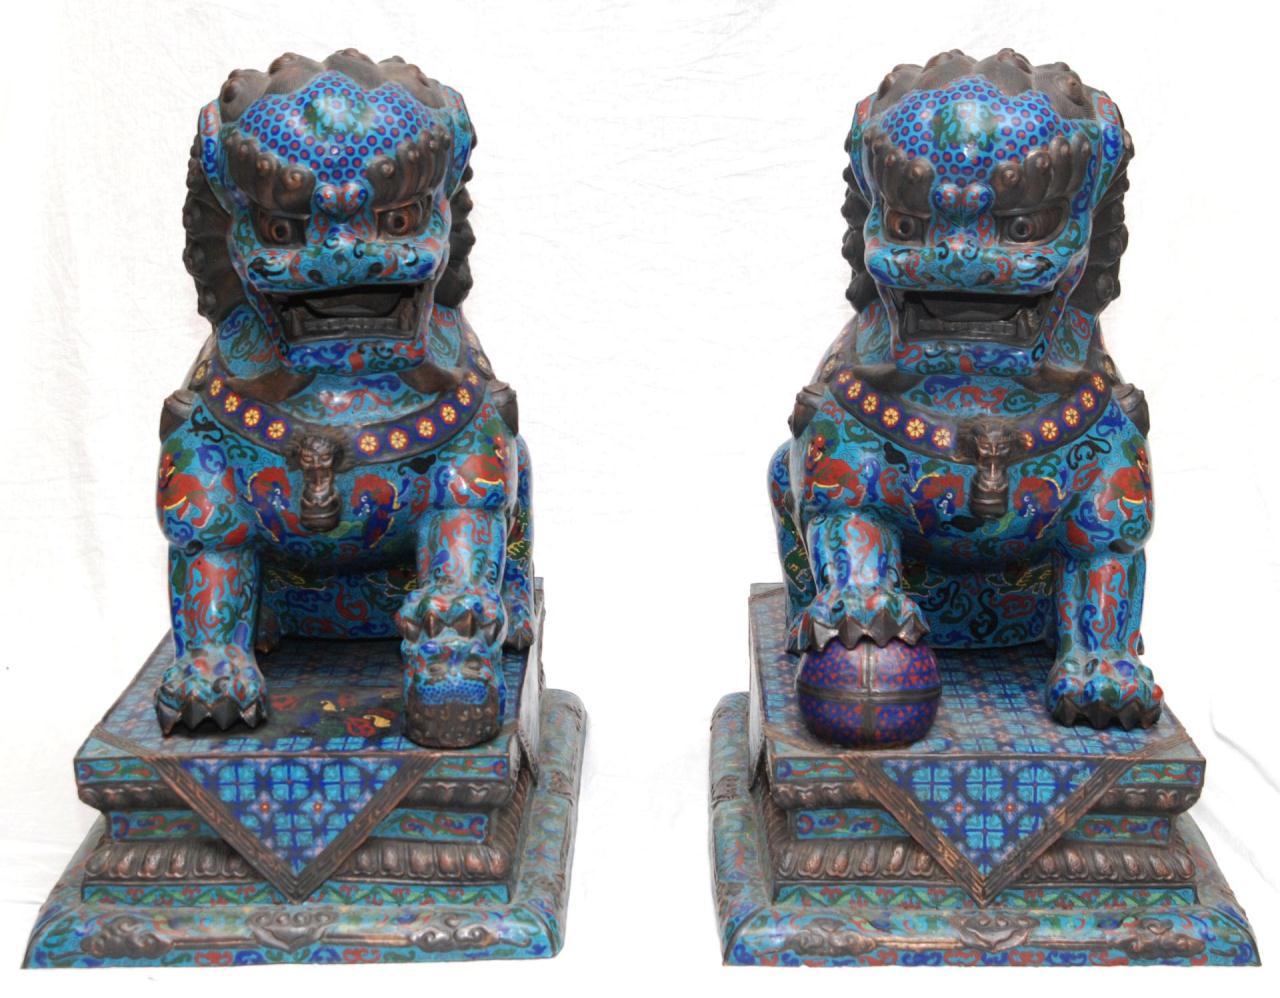 PAIR OF PALATIAL CHINESE CLOISONNE FOO DOGSA pair of palatial sized Chinese cloisonne enameled